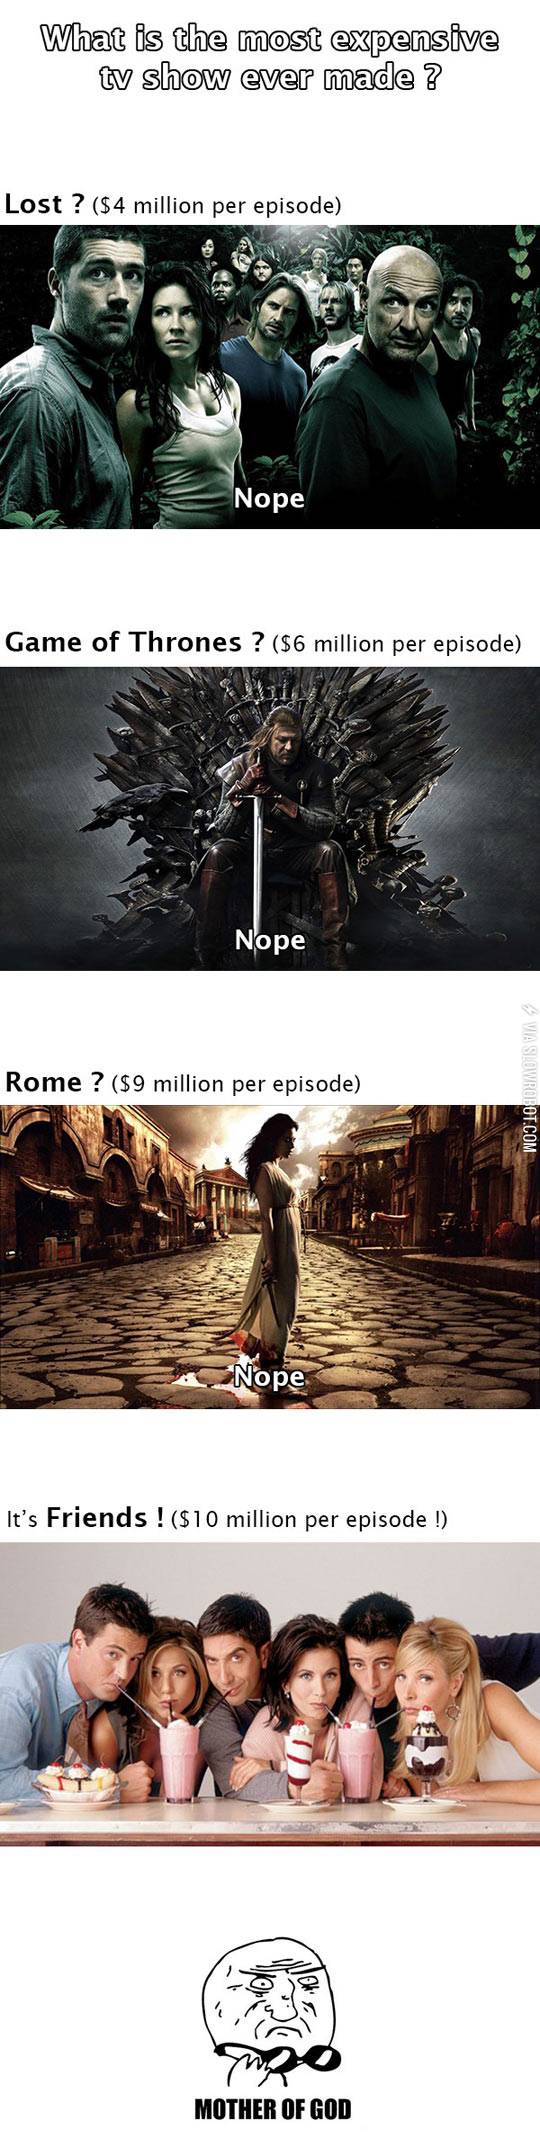 The+Most+Expensive+TV+Show+Ever+Made